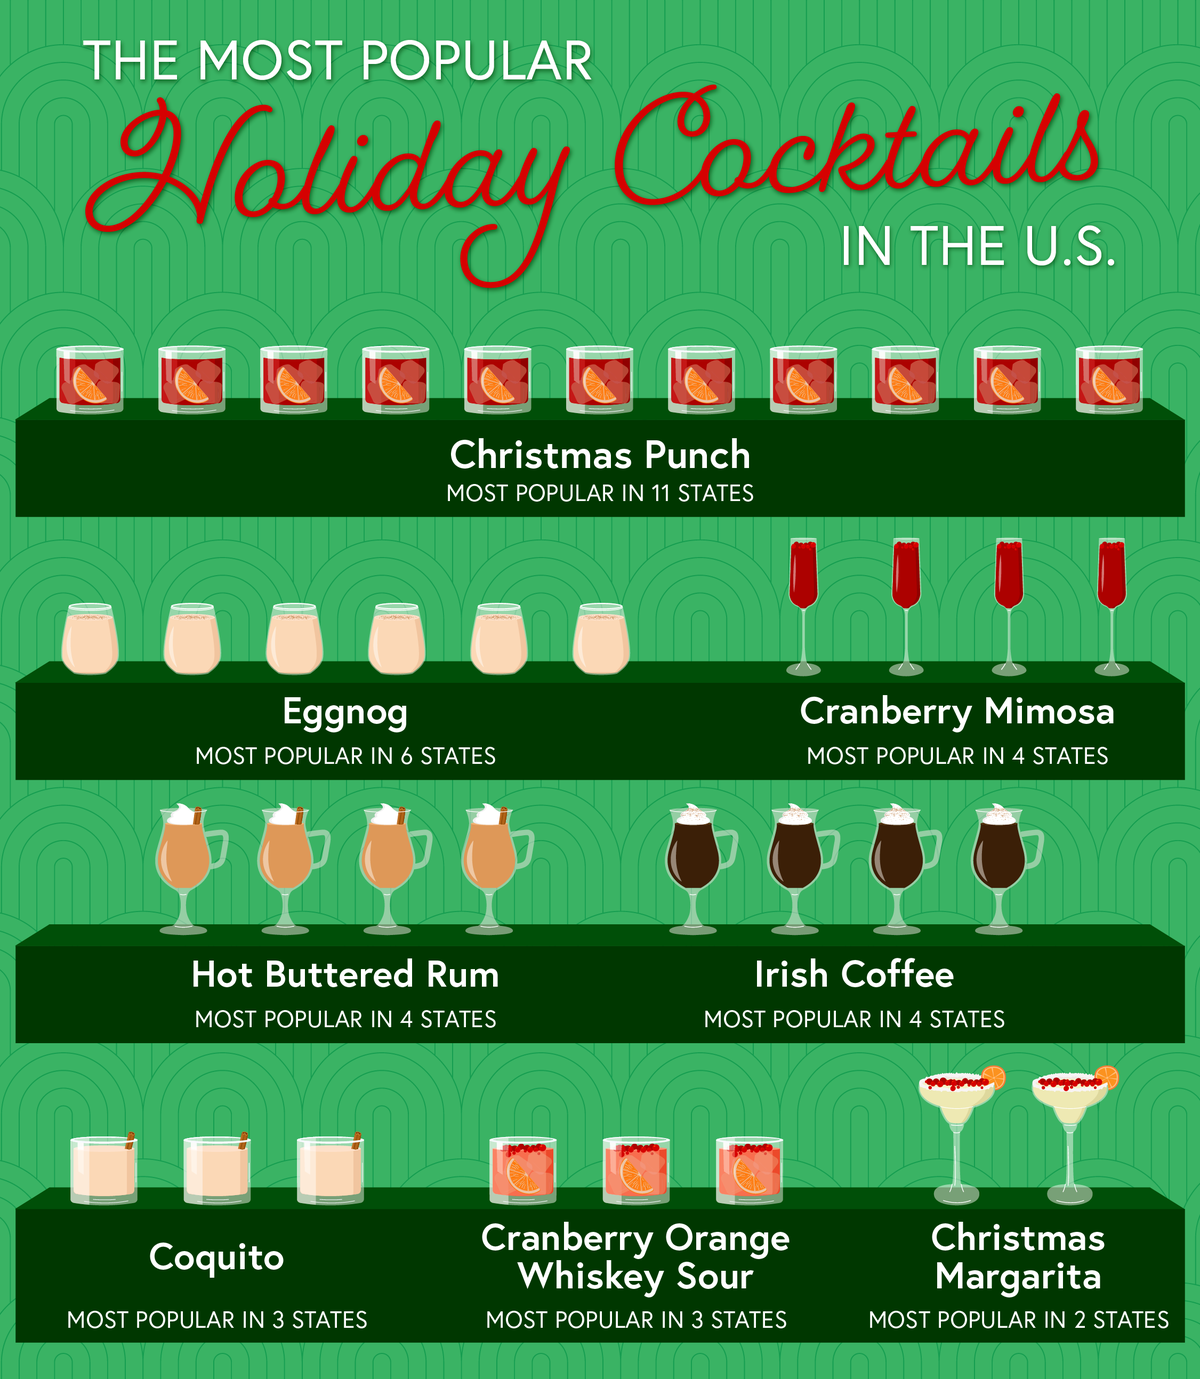 Pictorial chart showing the most popular holiday cocktails in the U.S. overall